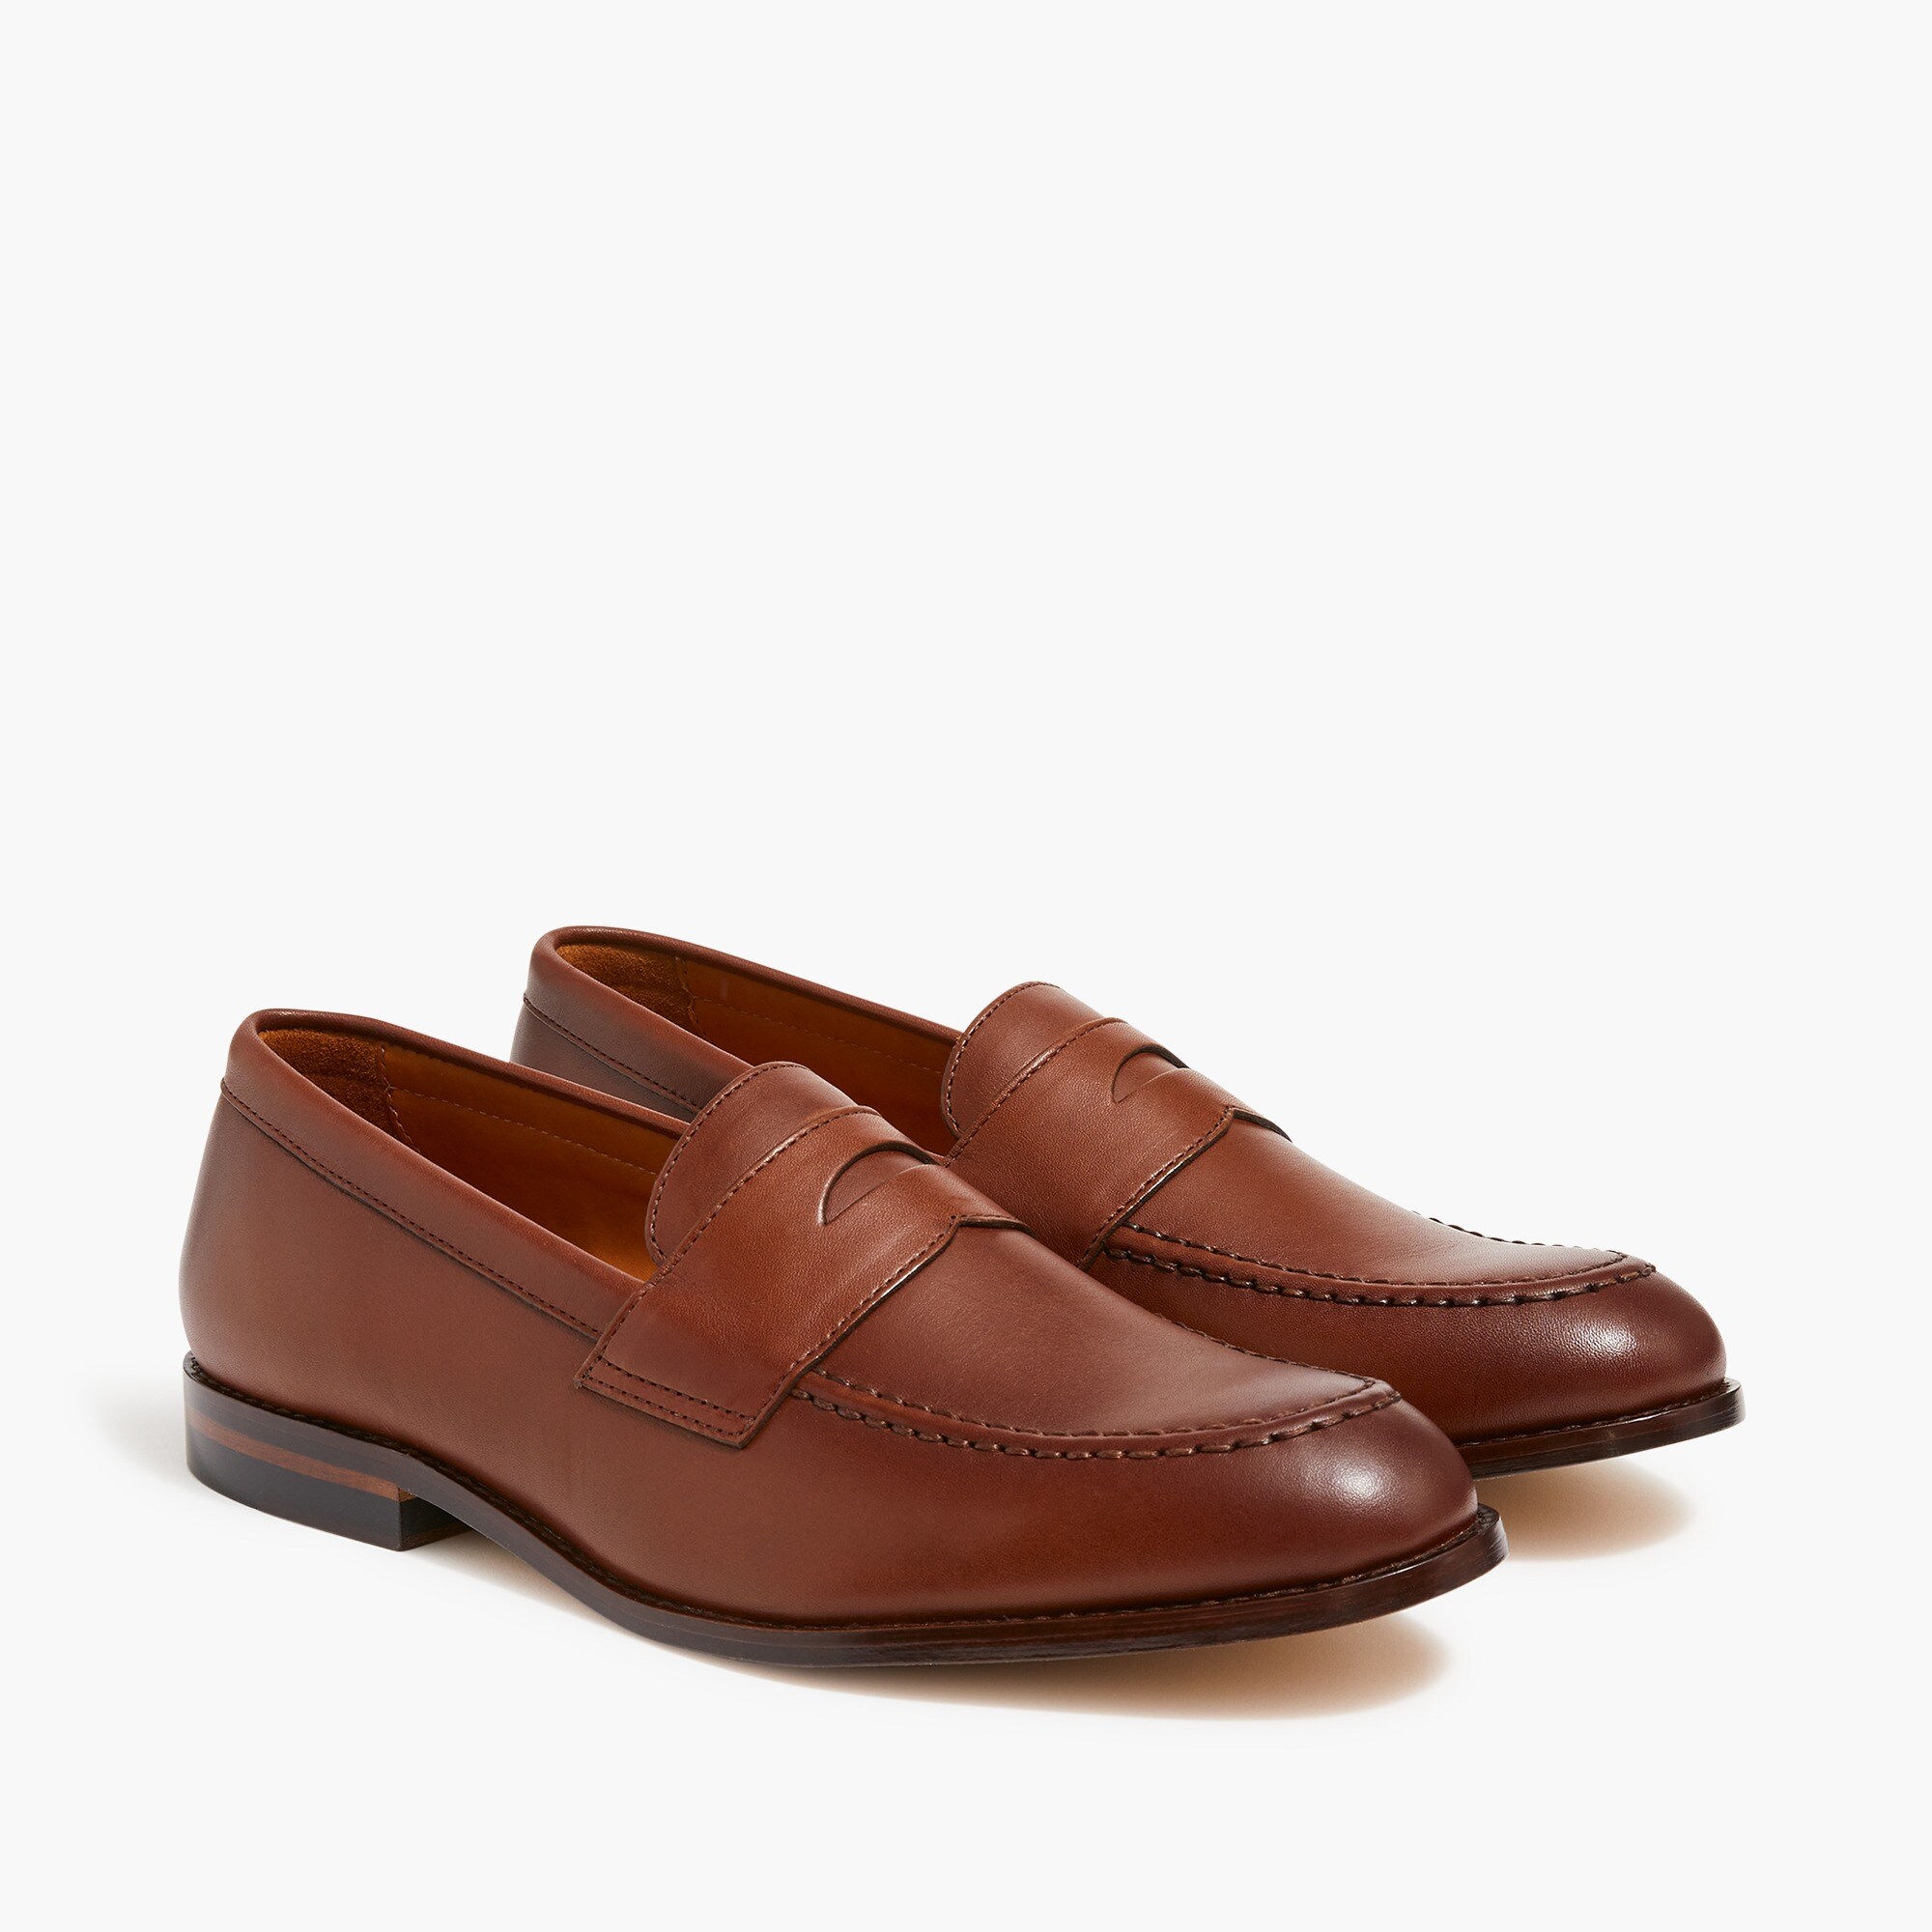  Classic penny loafers